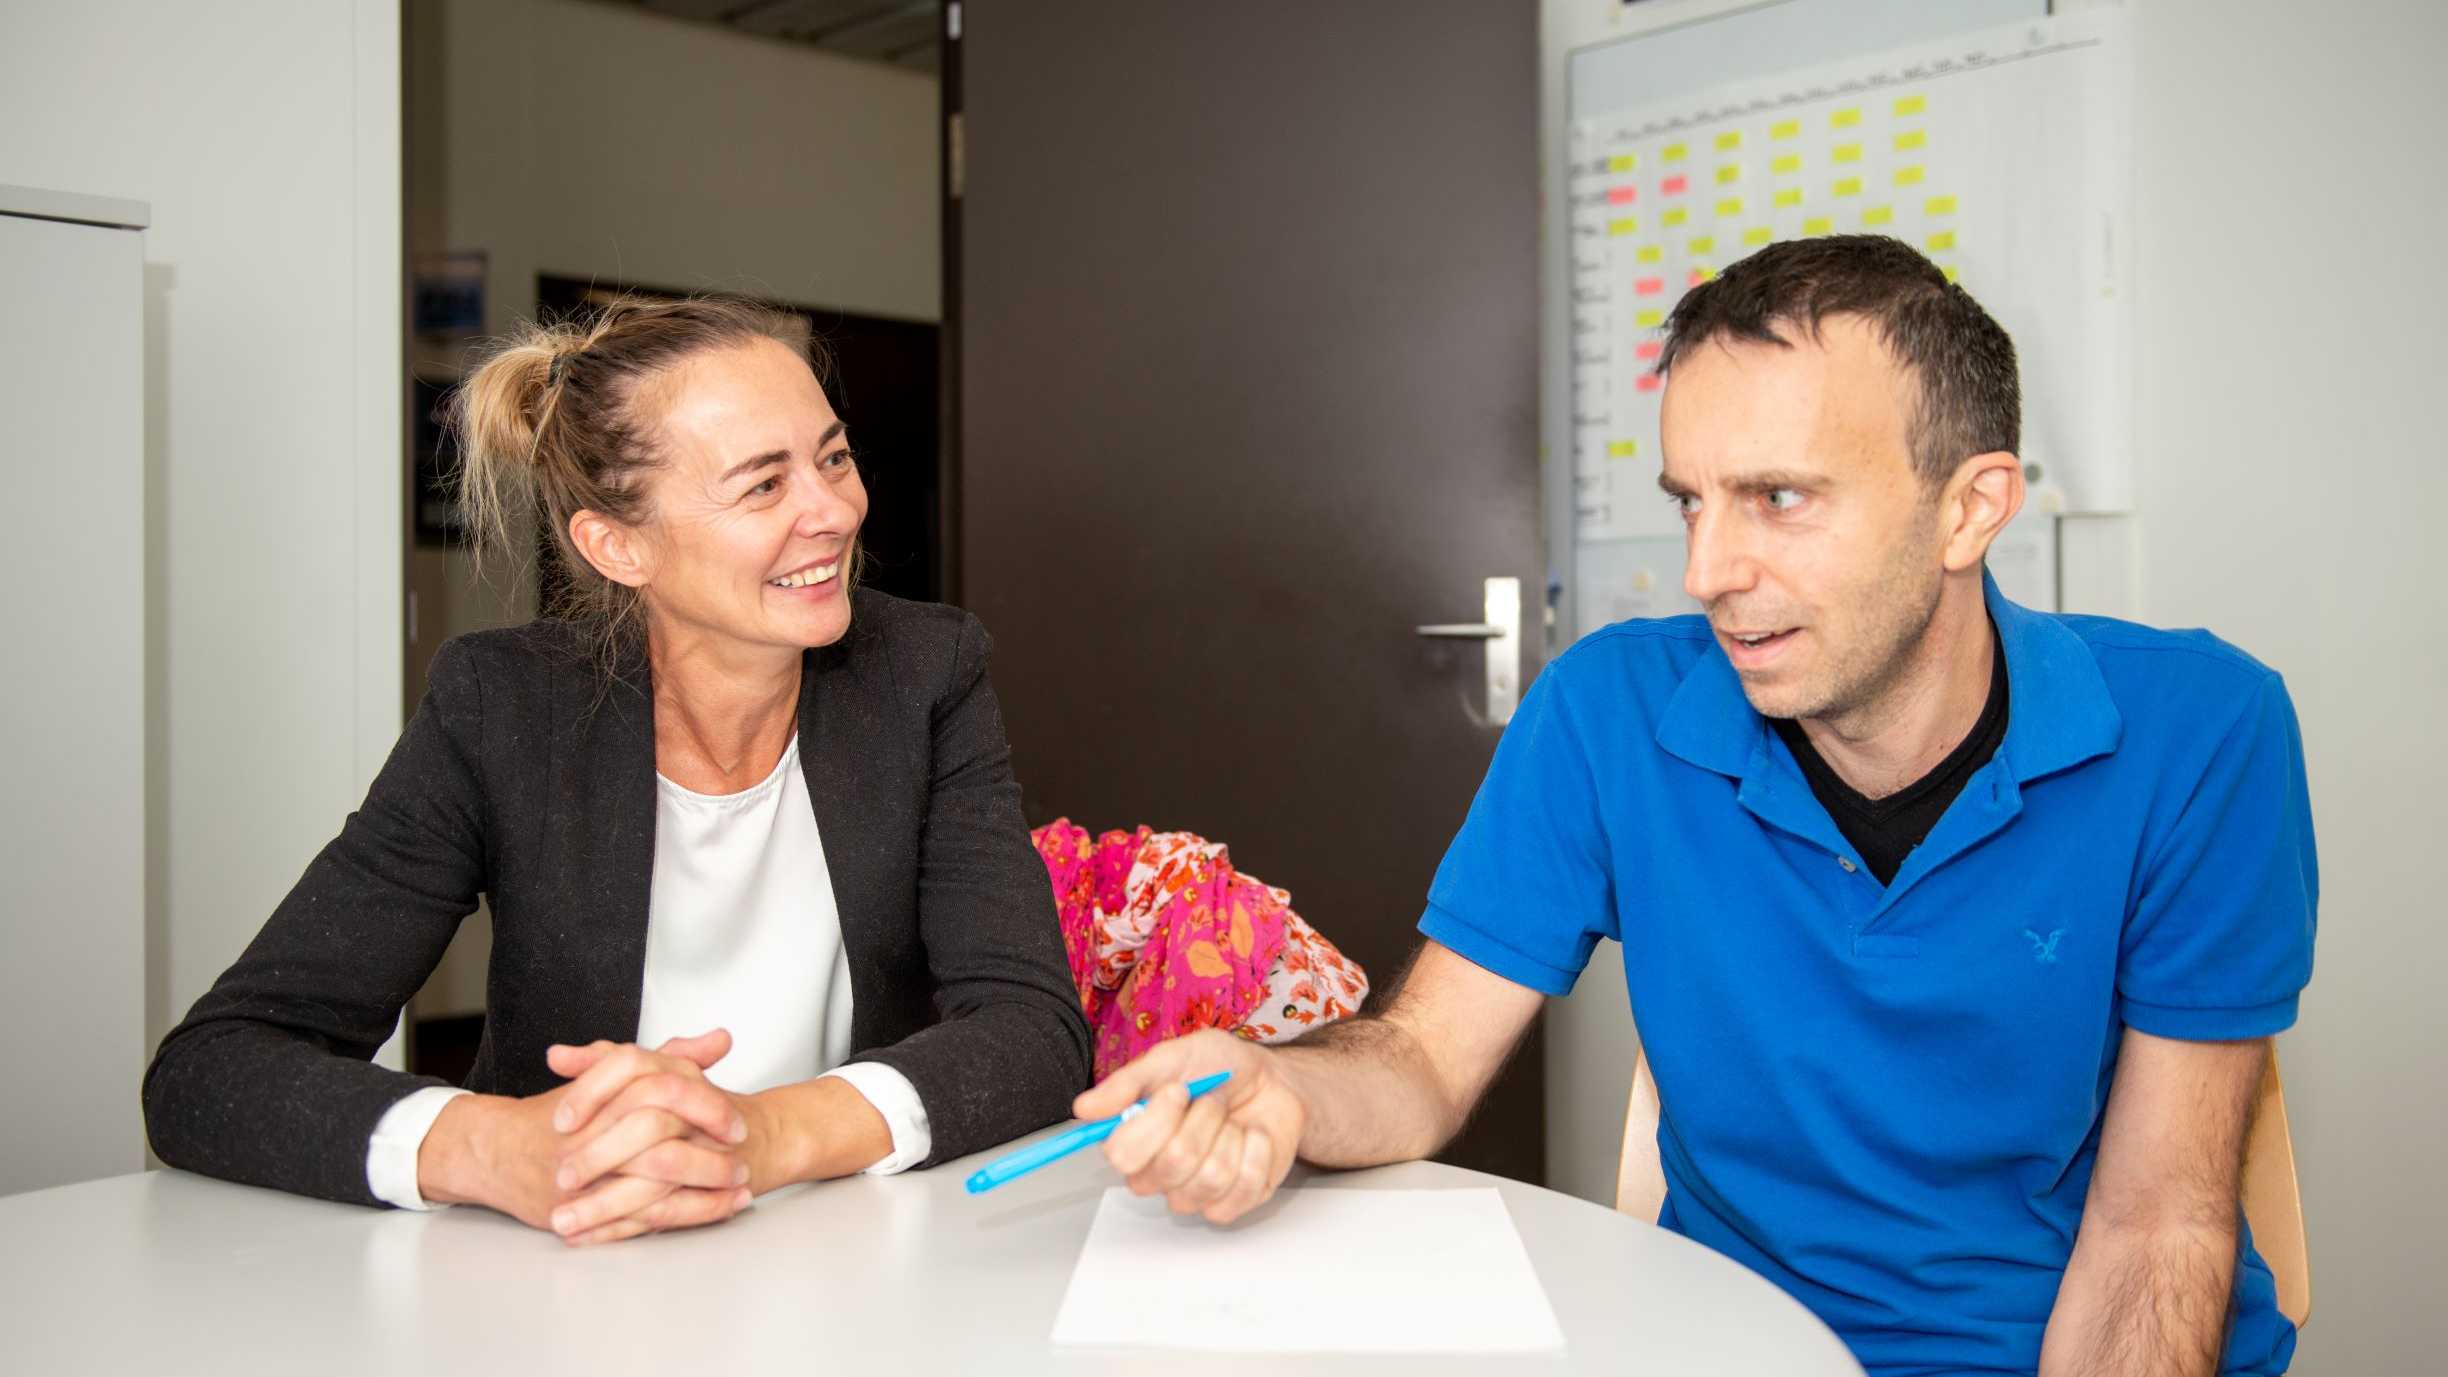 ETH Policy Fellow alumna, Dr. Regina Witter in a one-to-one meeting with ETH professor Francesco Corman